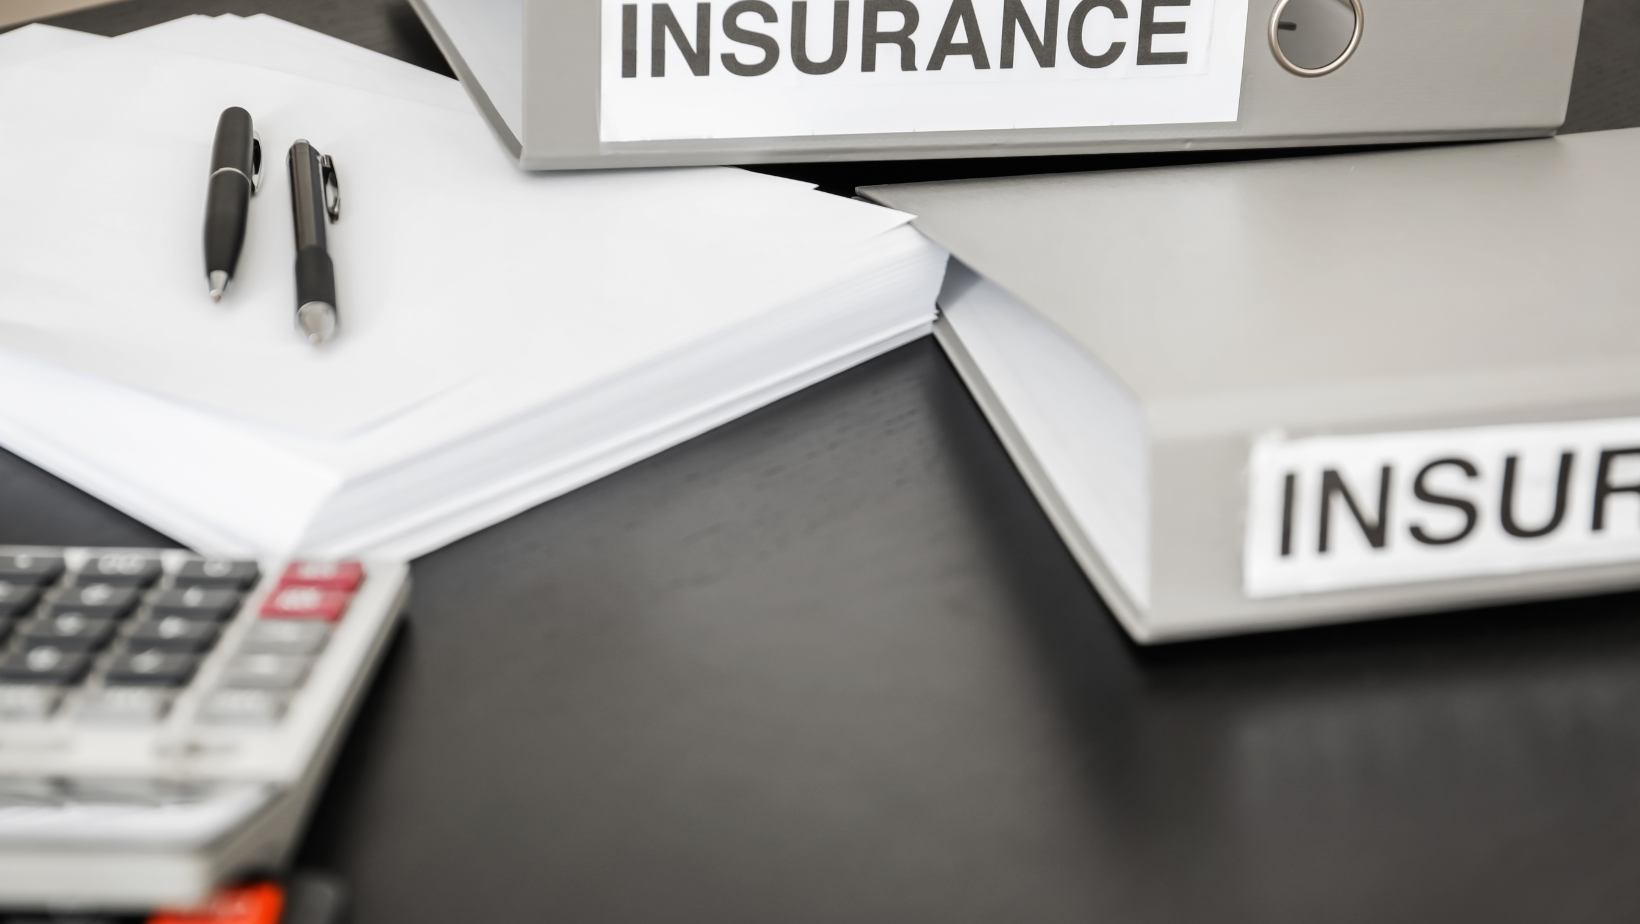 Liability insurance for directors and officers